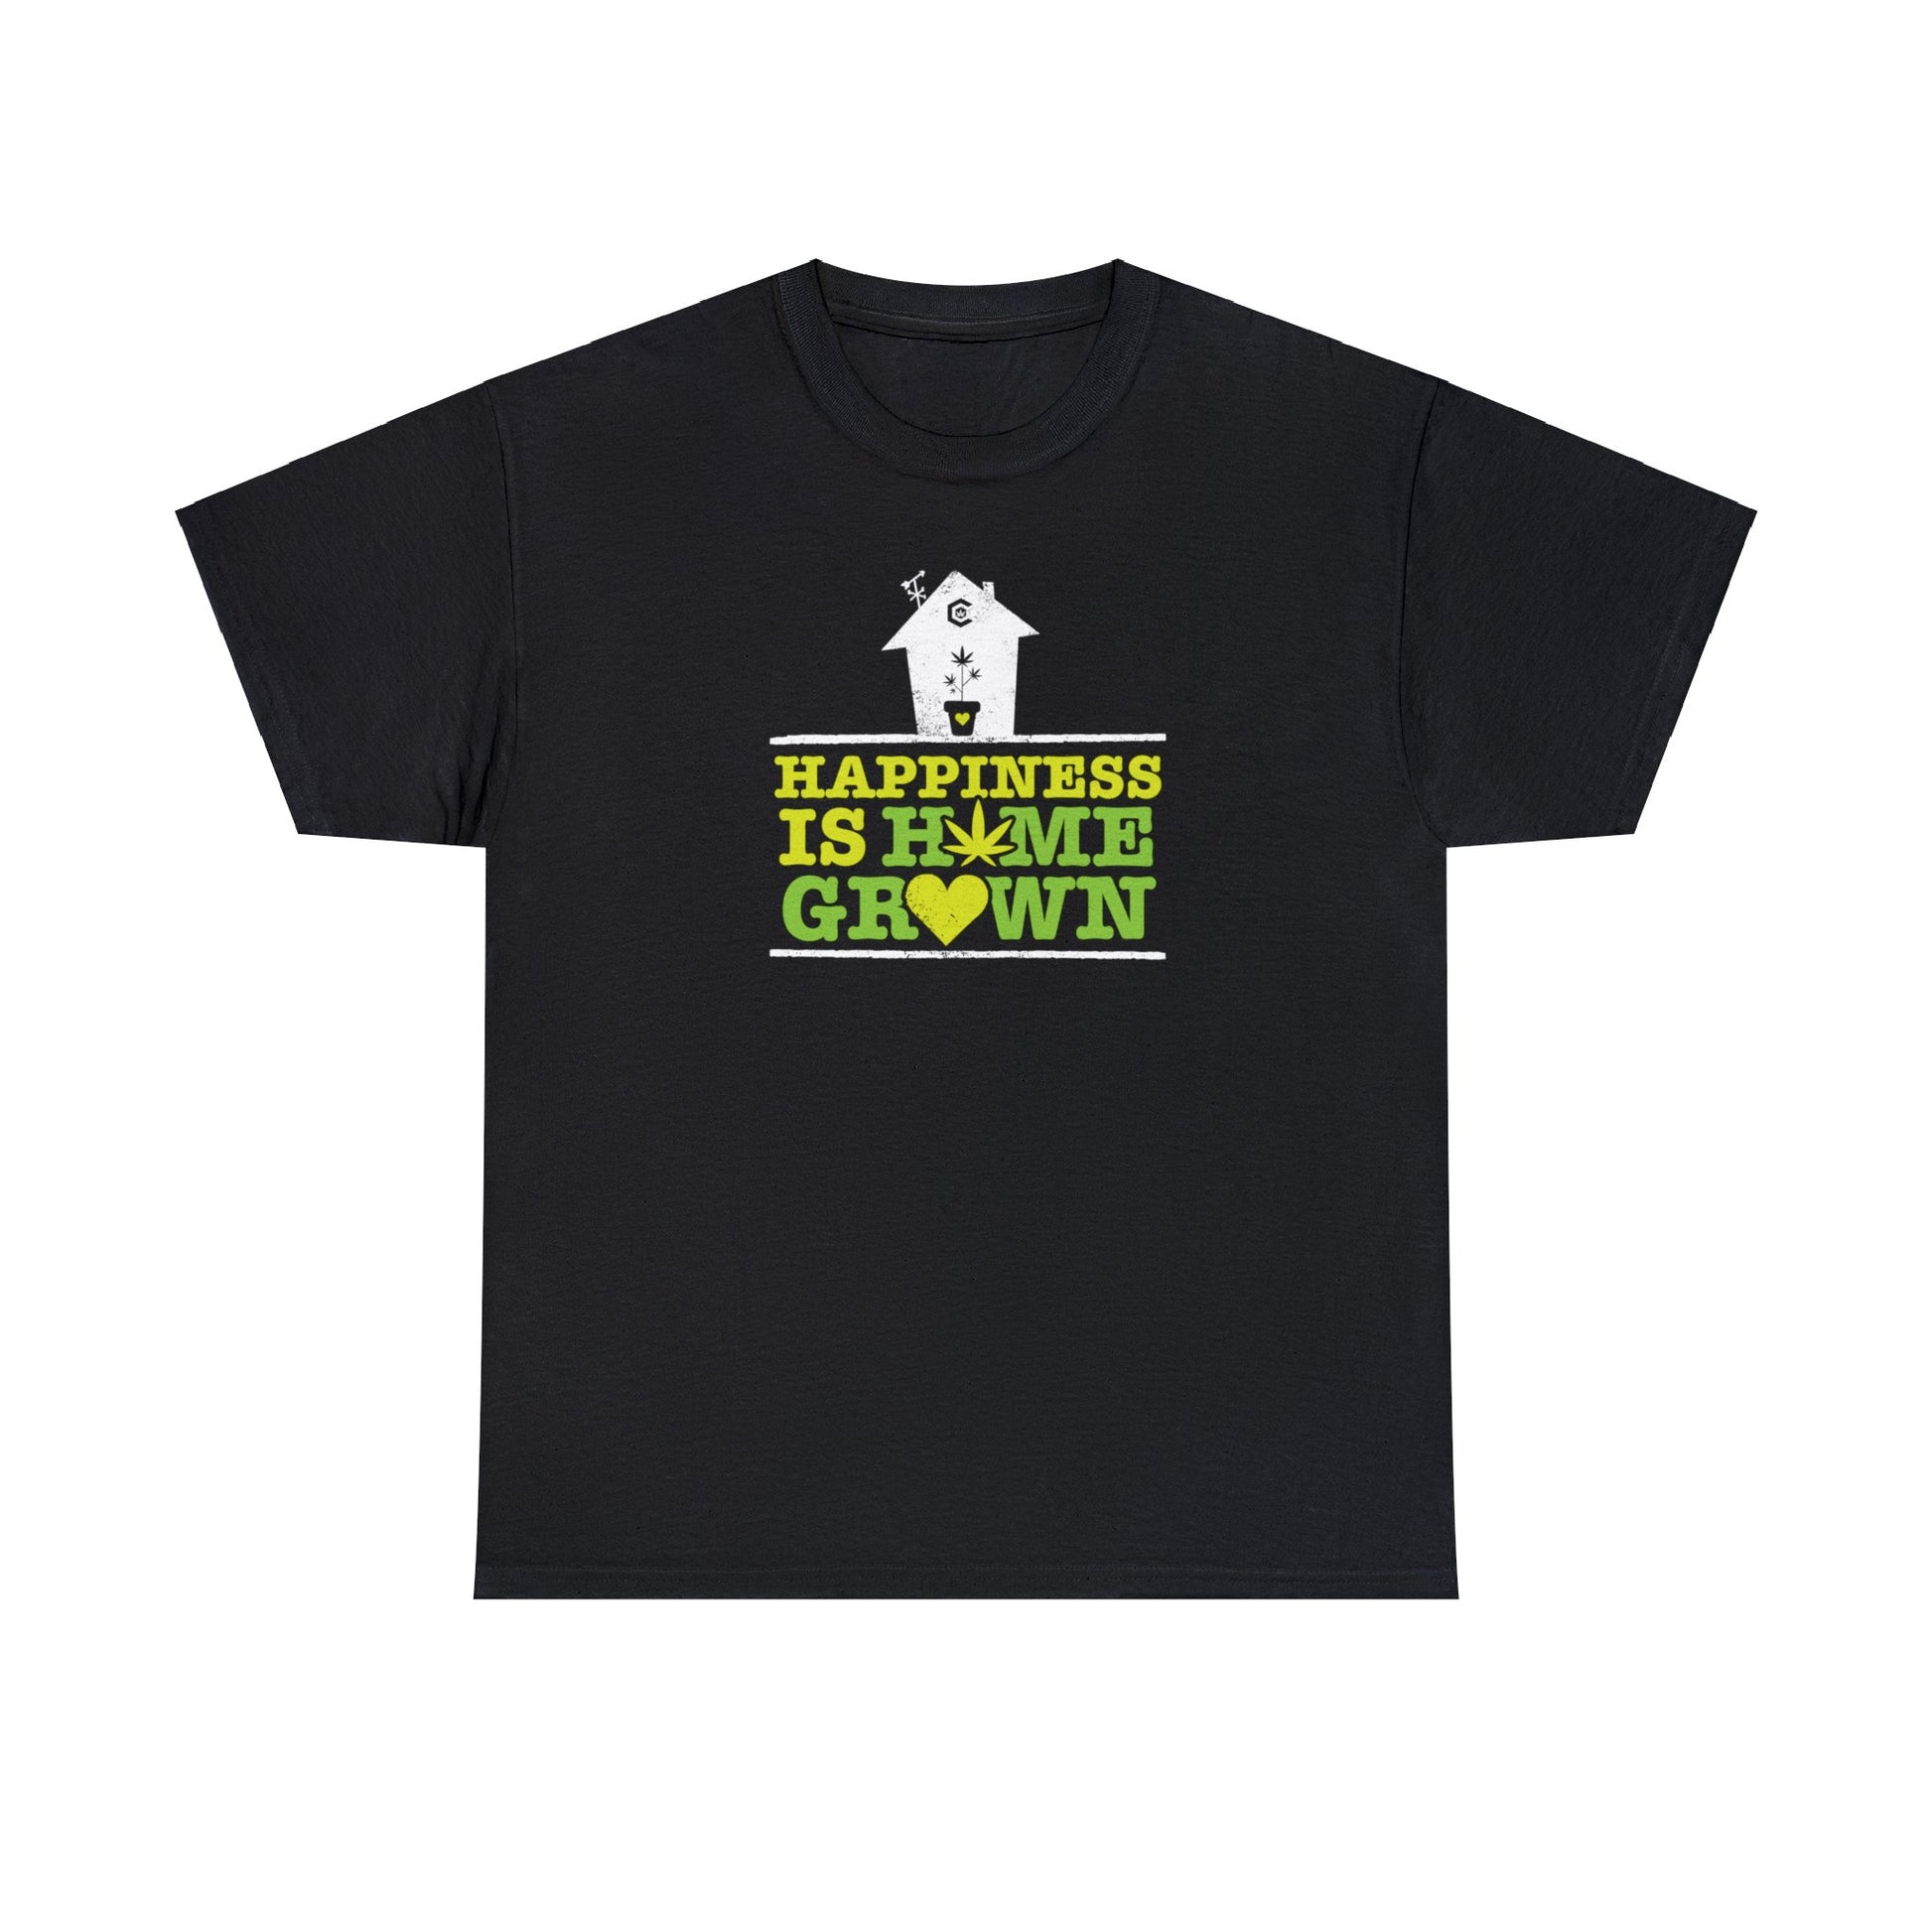 A black Happiness Is Homegrown Pot Shirt with a green and yellow house design.